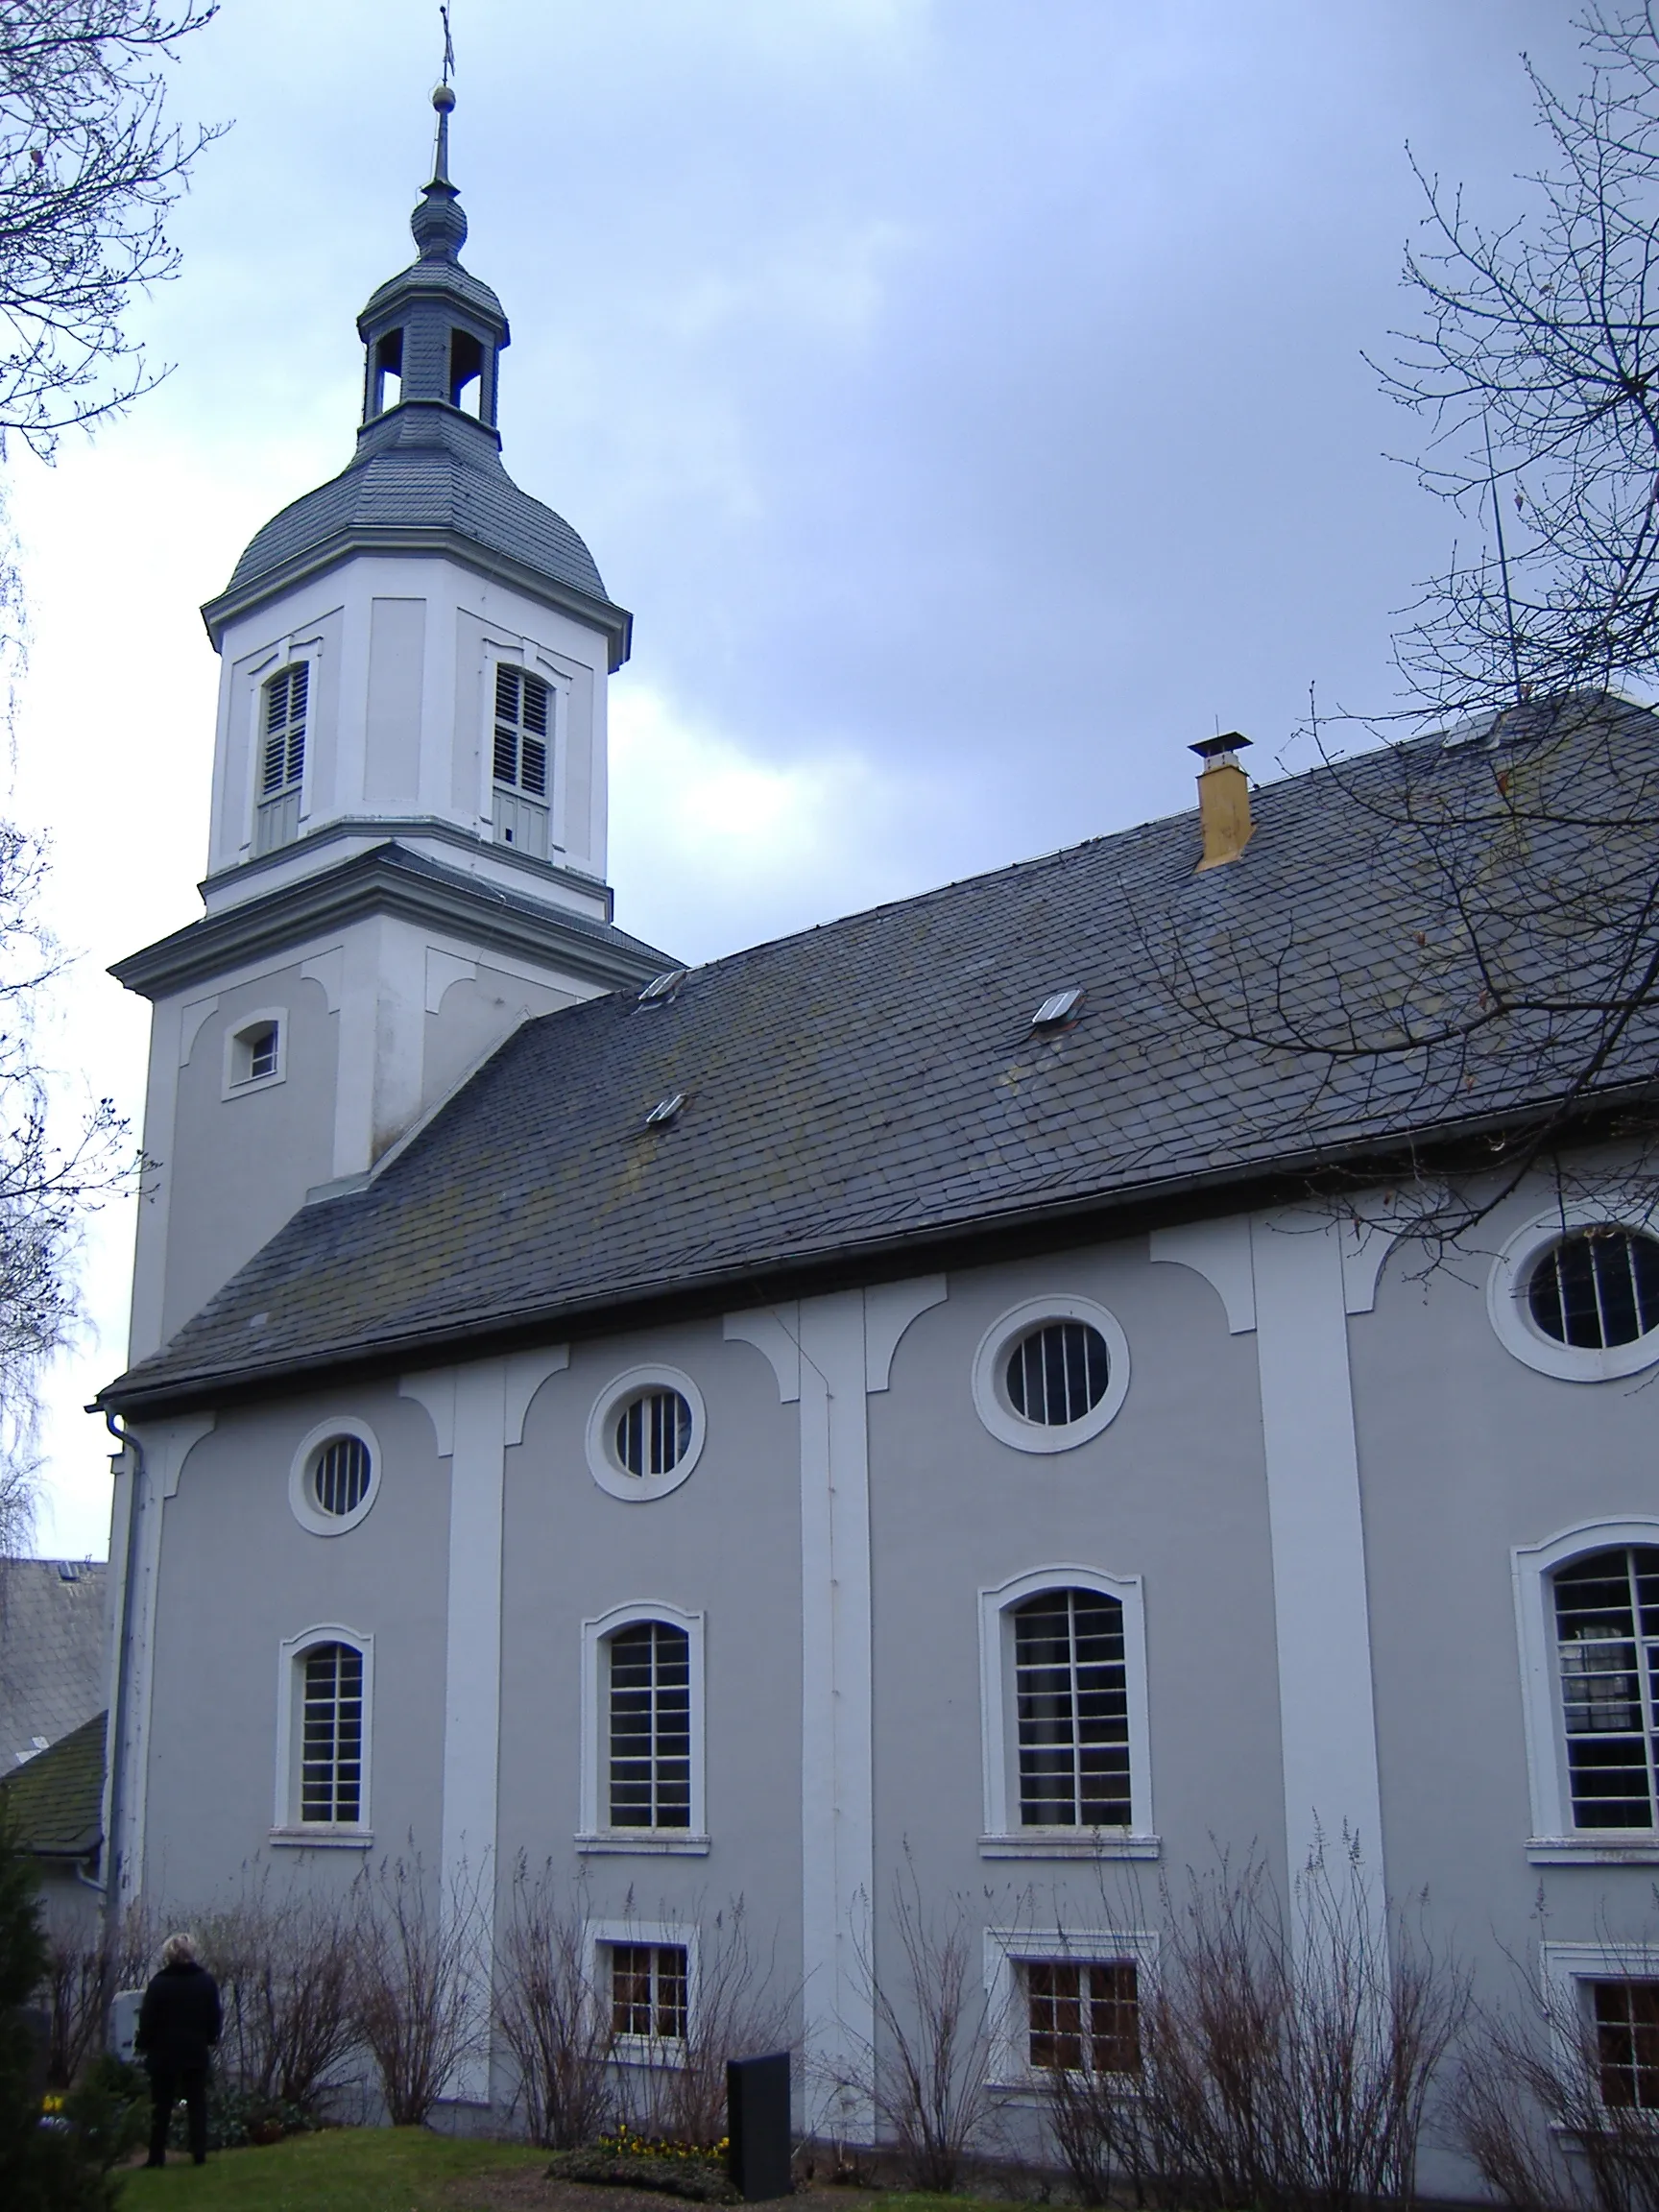 Photo showing: The Church of Fraureuth (Saxony).